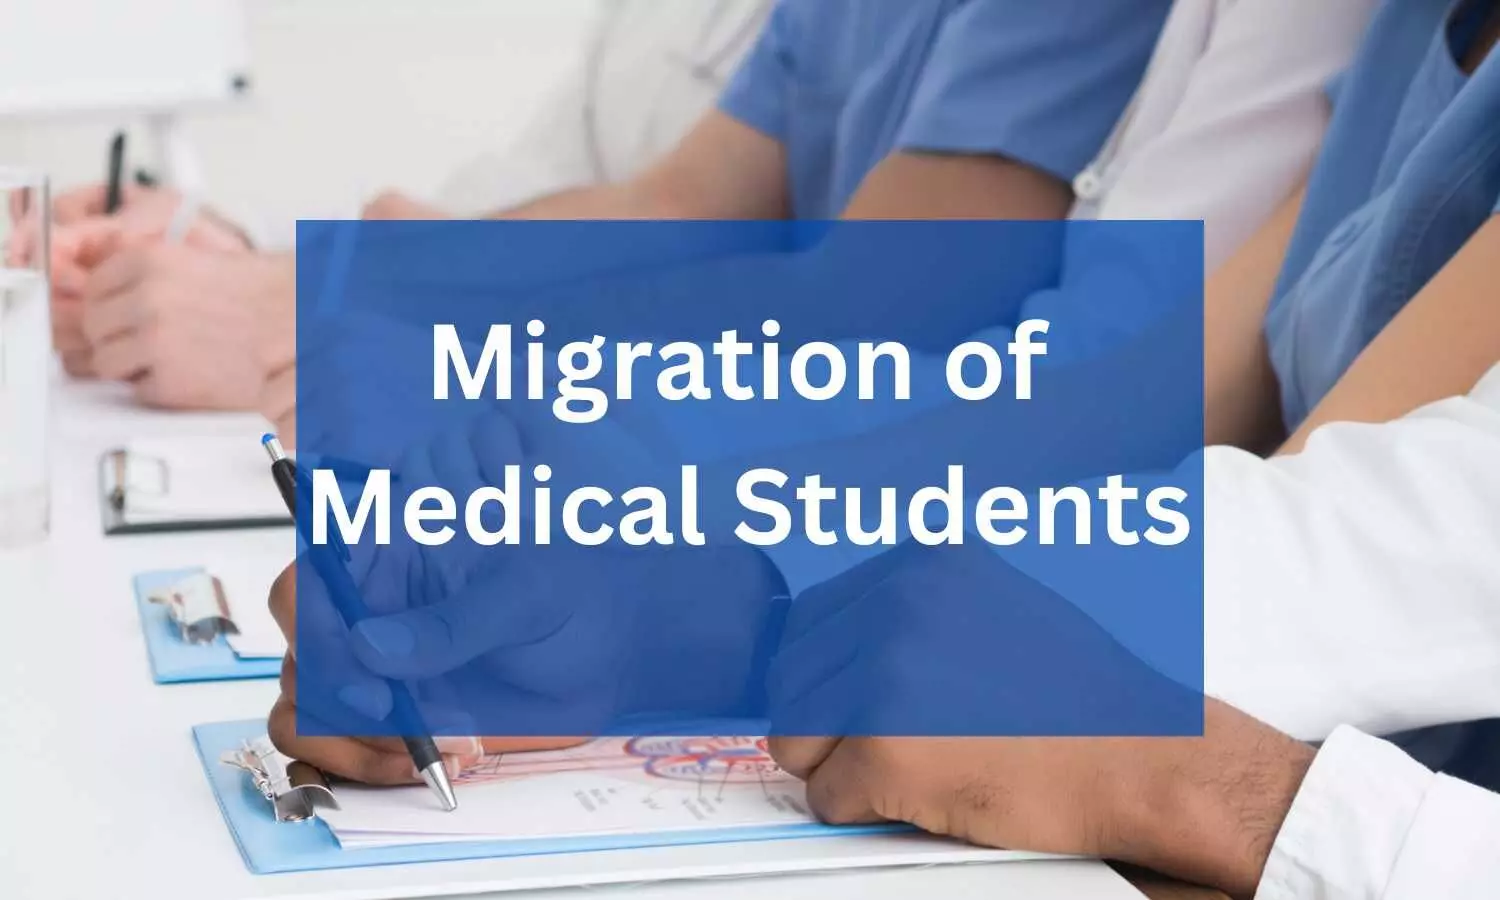 Private Medical College MBBS students to be migrated to other private medical colleges only